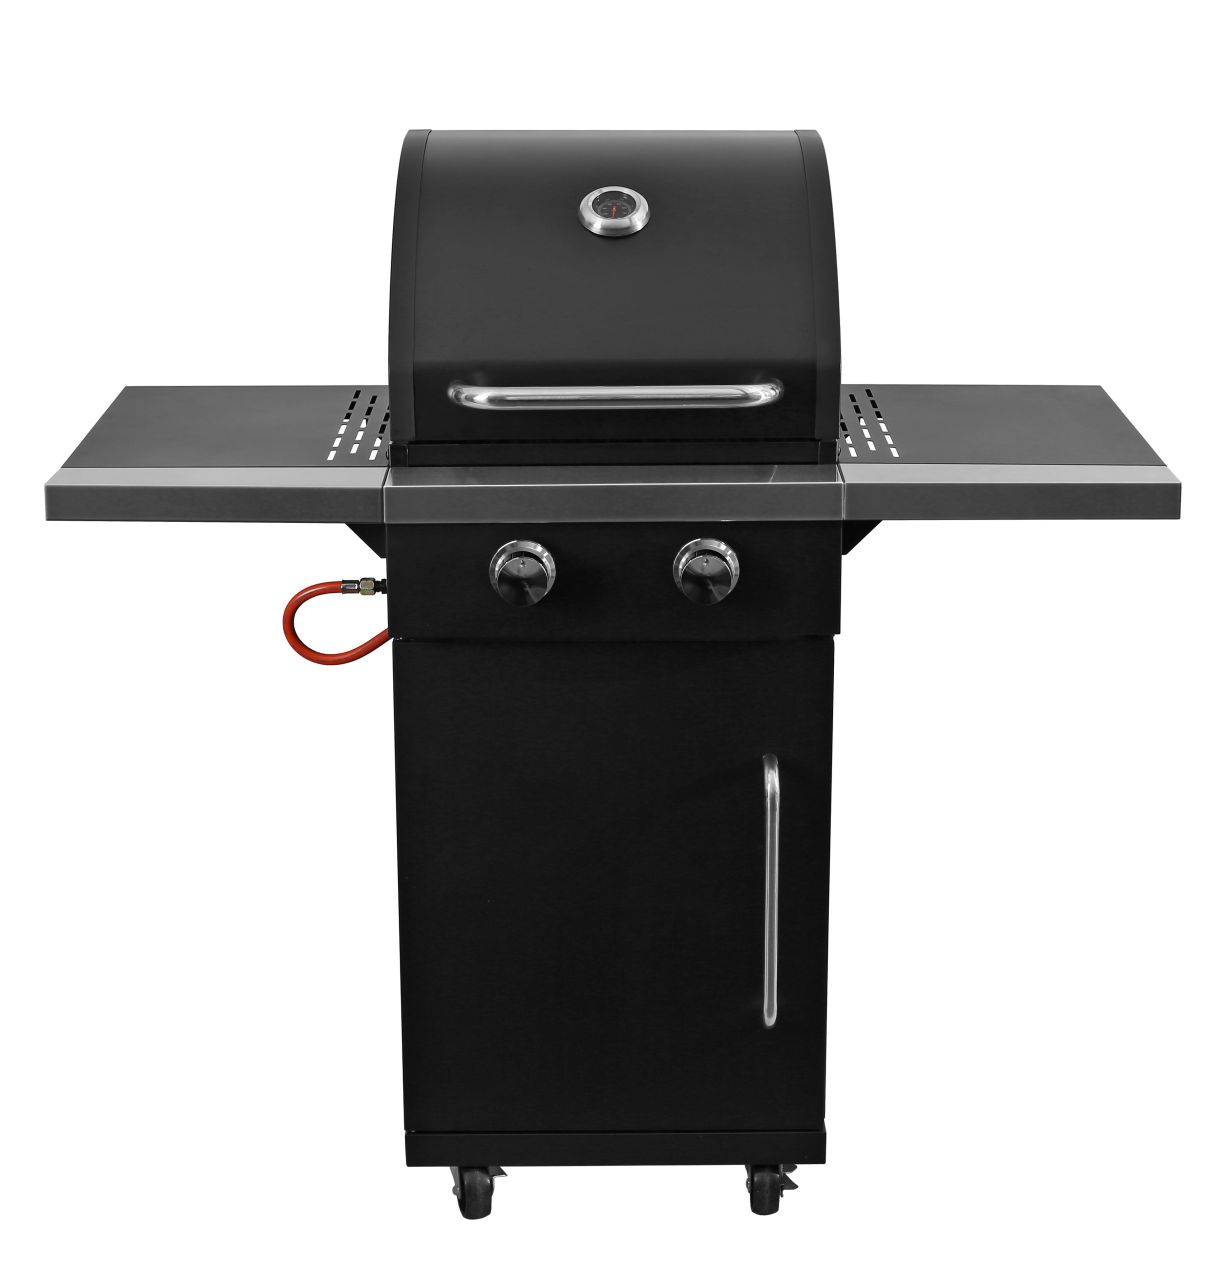 ACTIVA Lord 200 gázgrill